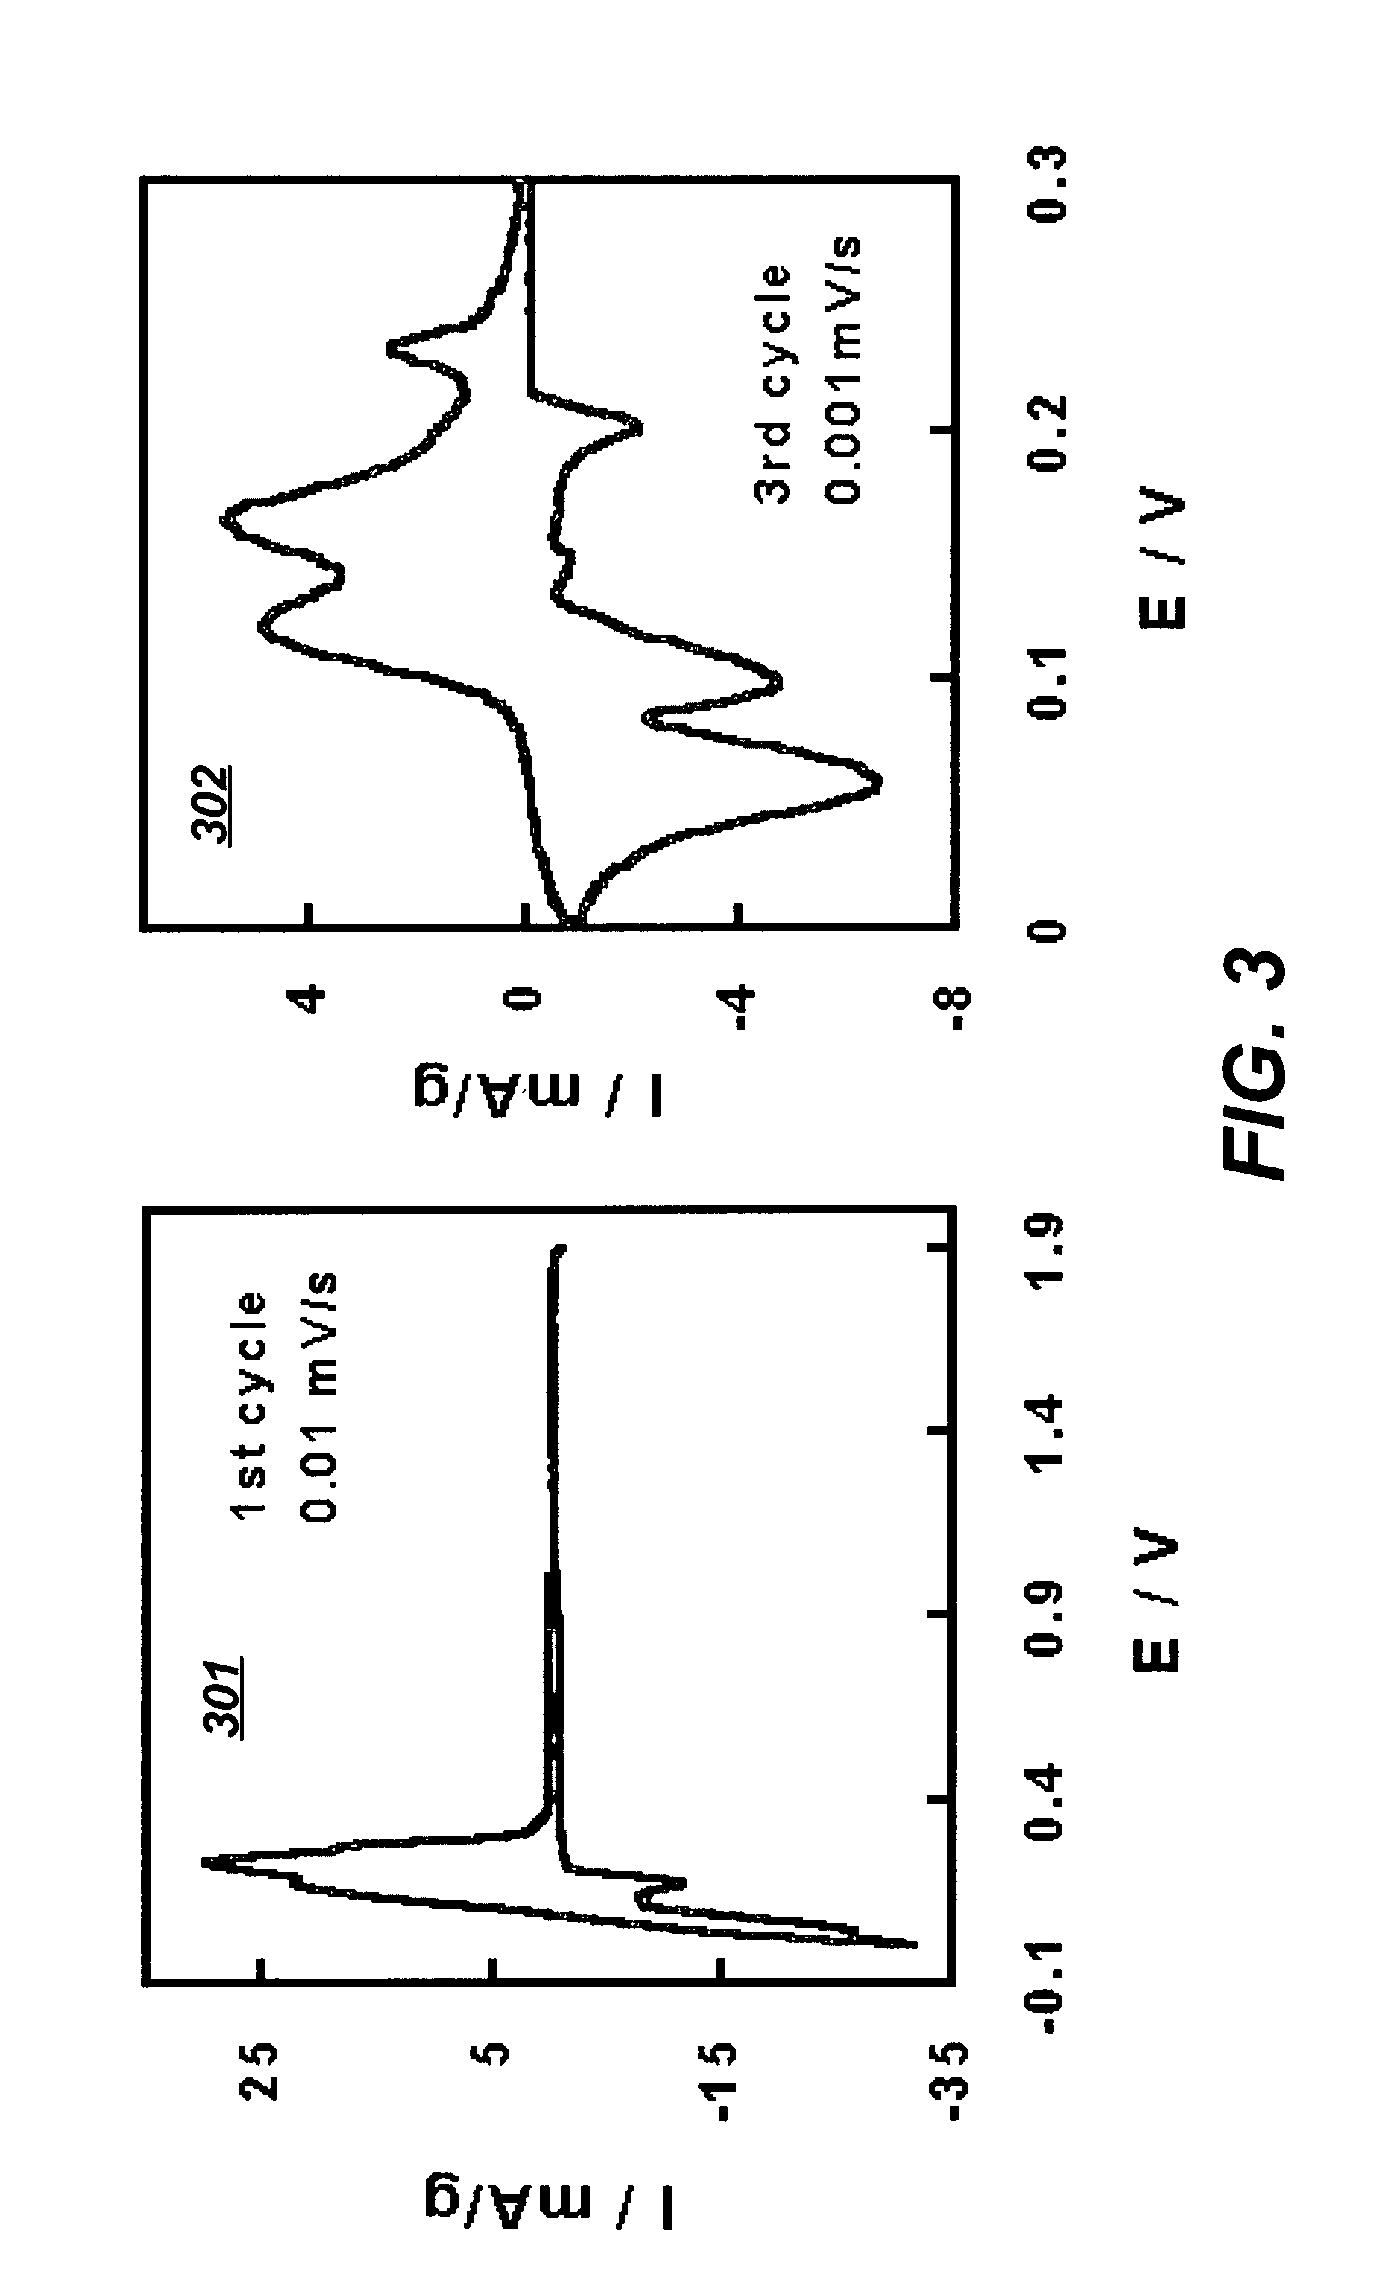 Solvent systems comprising a mixture of lactams and esters for non-aqueous electrolytes and non-aqueous electrolyte cells comprising the same